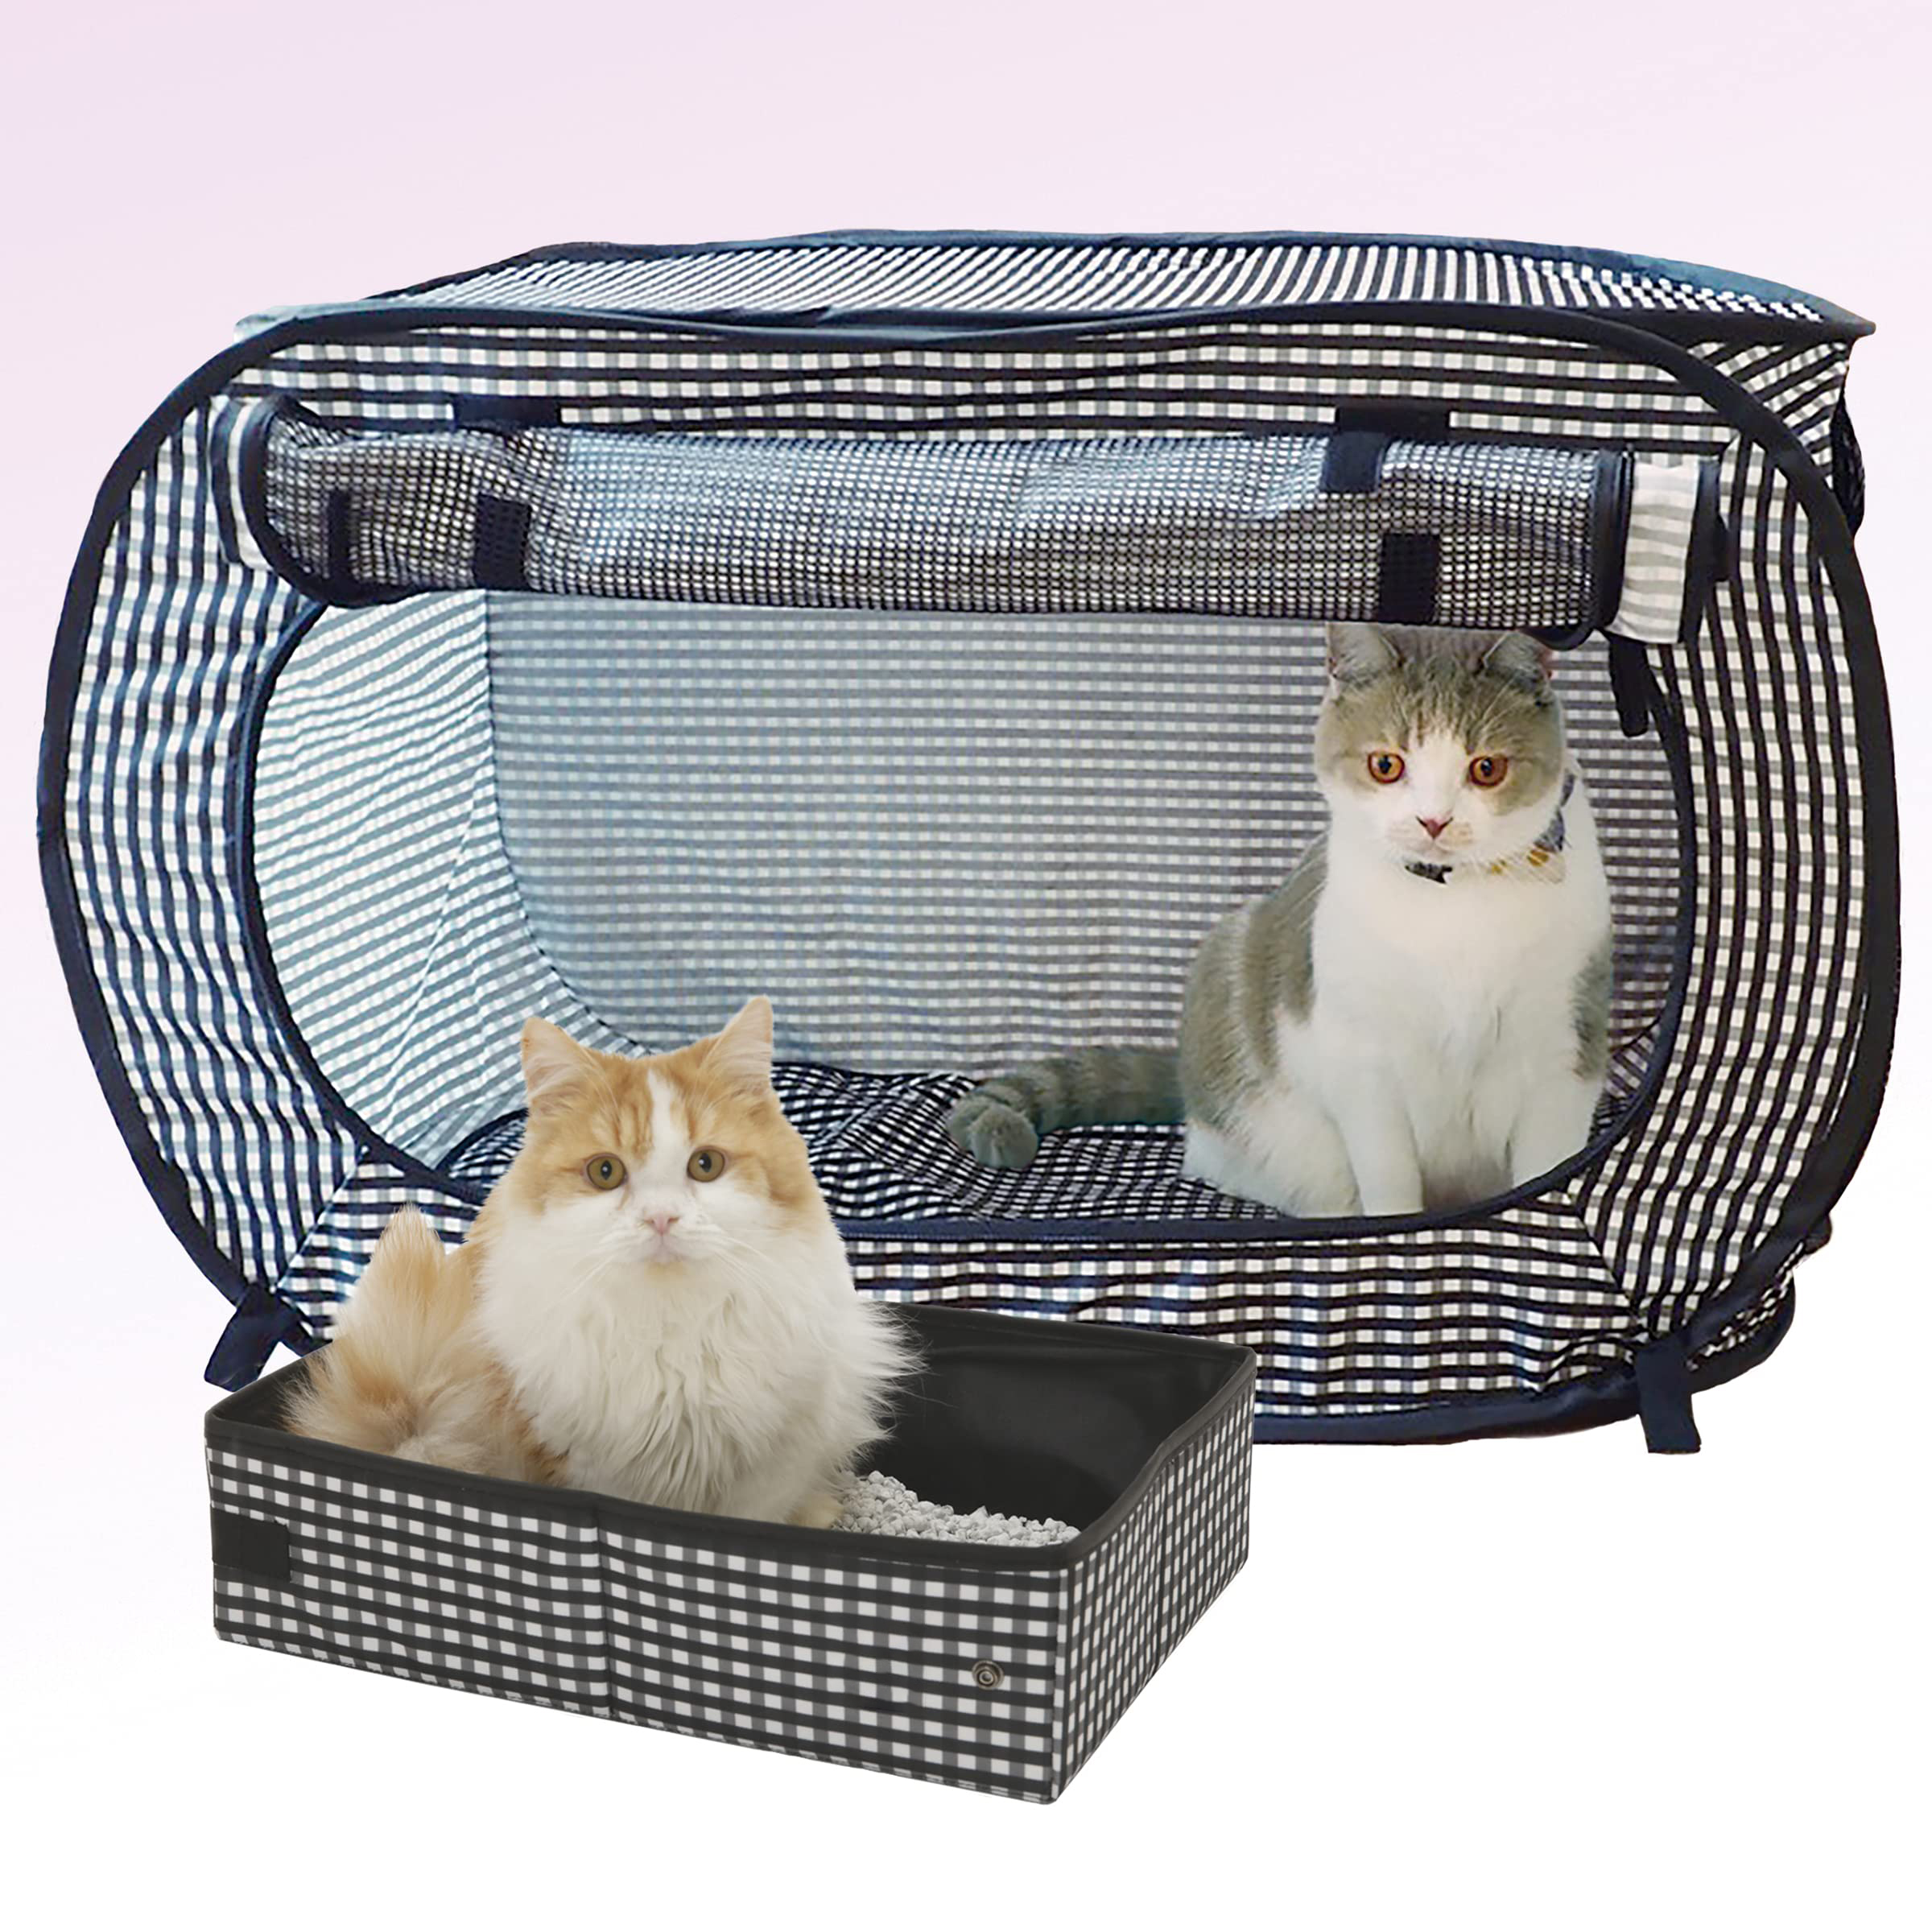 High Quaility Pet carrier – Portable pressure free cage and bin, indoor and outdoor, travel – TIGER